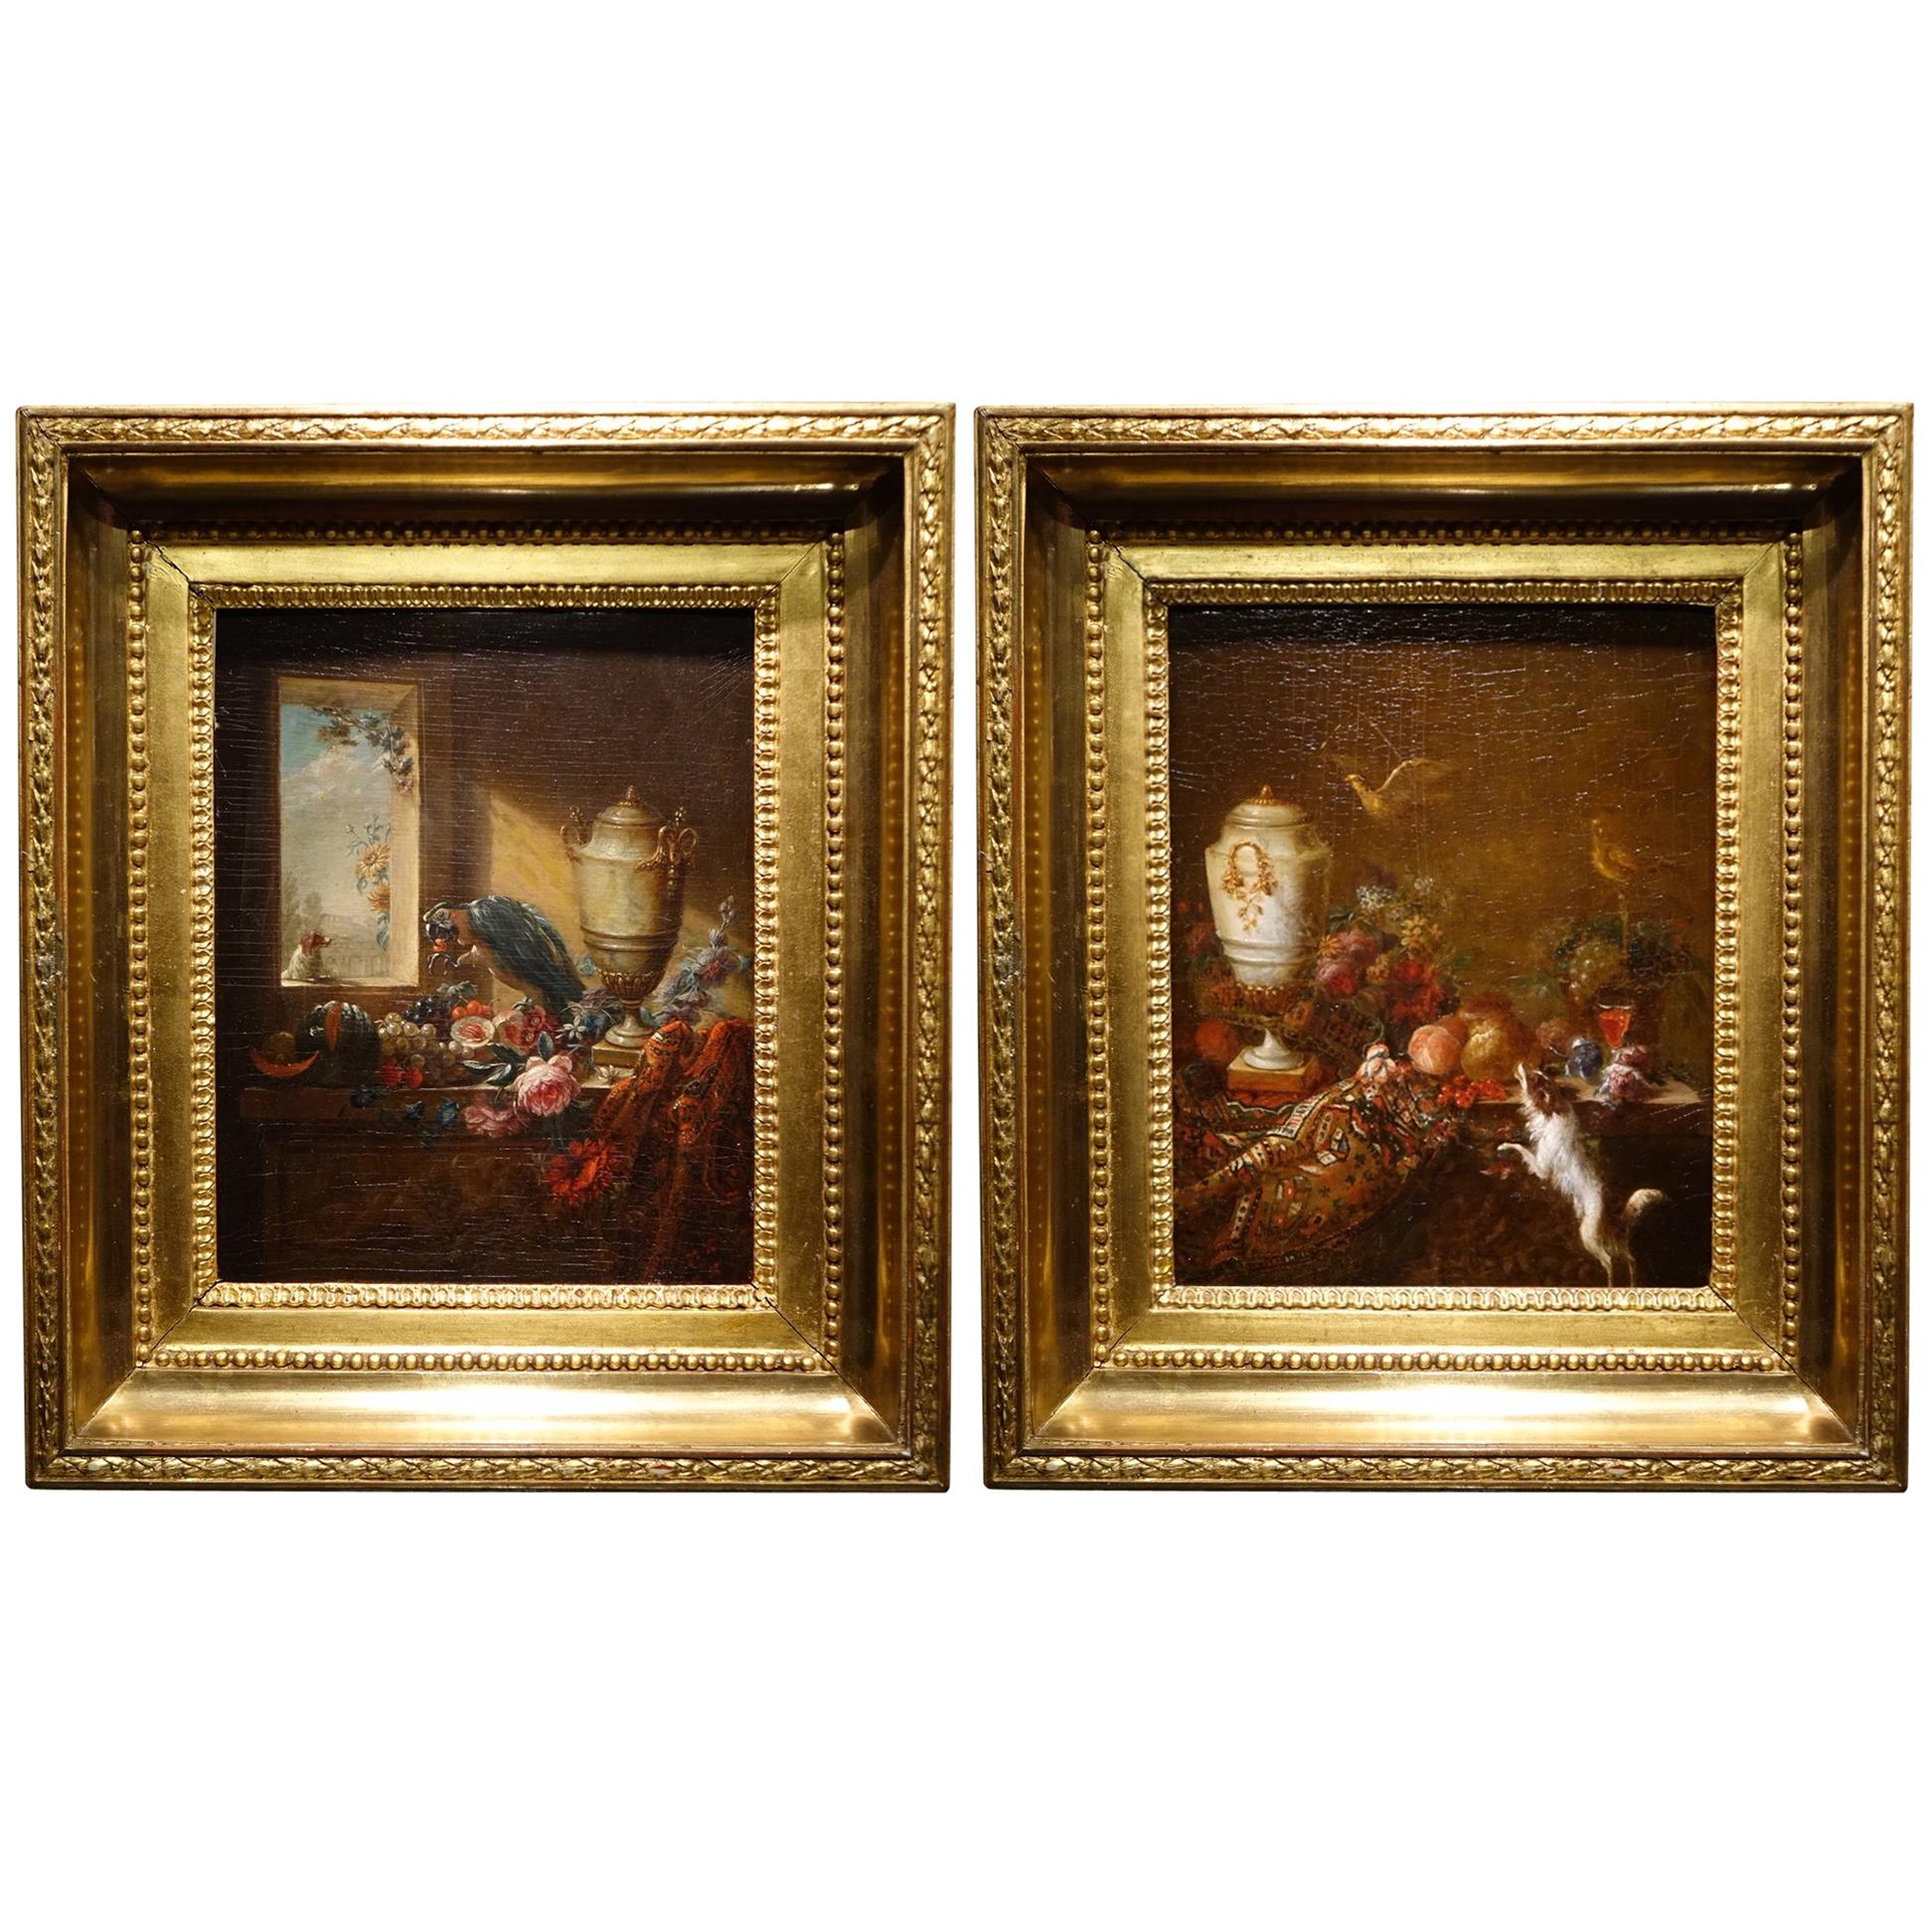 Pair of Still Life Painting, 19th Century French School, Oil on Oak